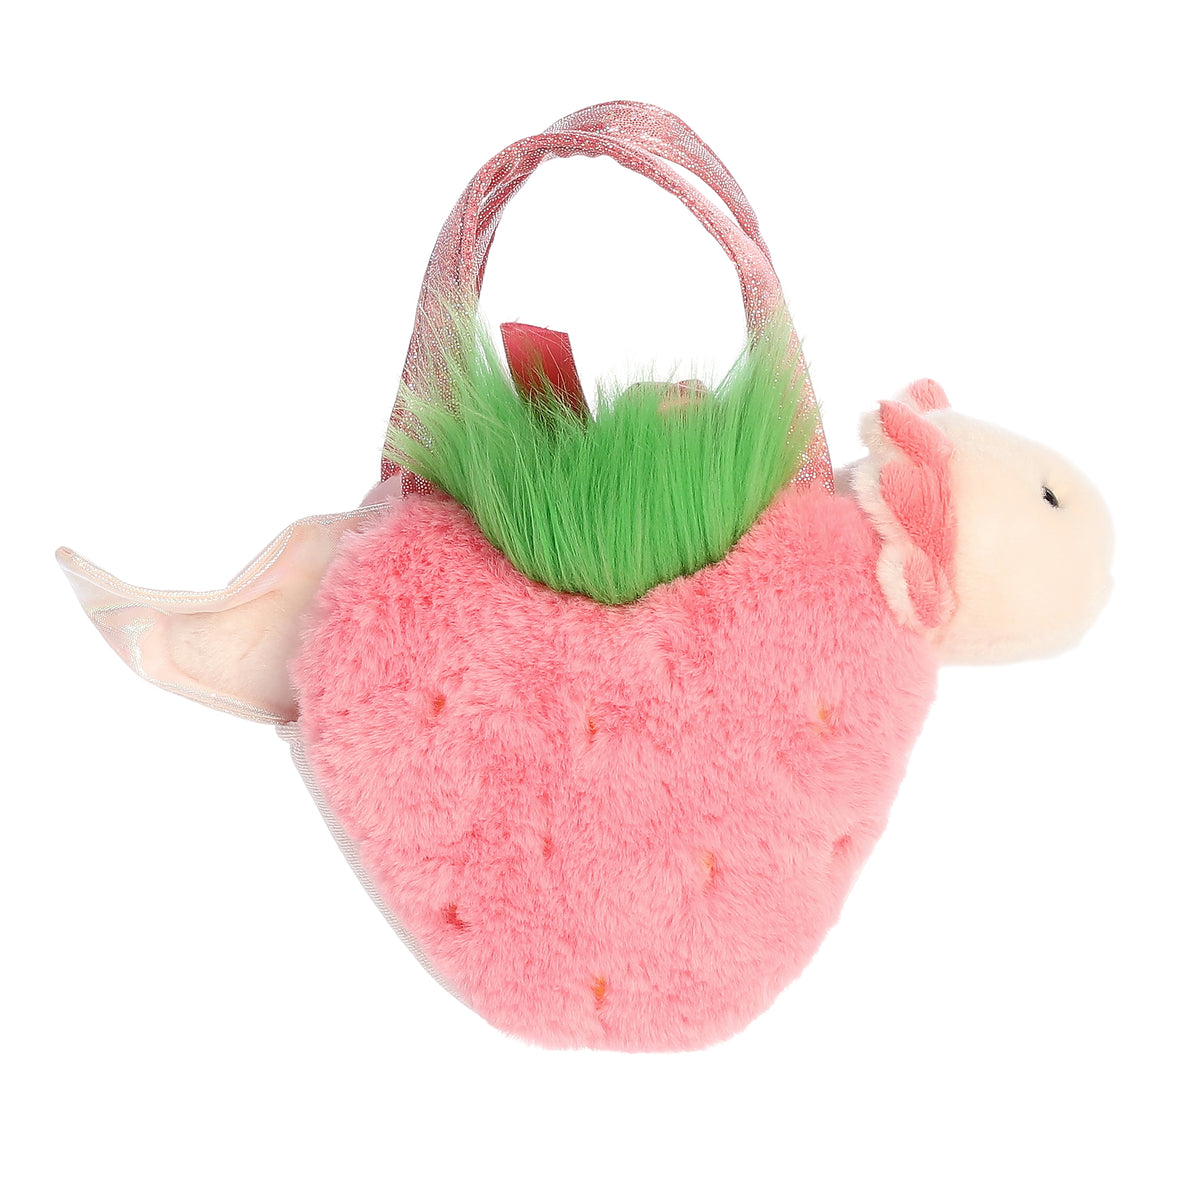 Red strawberry carrier from Aurora's Fancy Pals with a joyful axolotl plush peeking out, radiating cheer and fun.